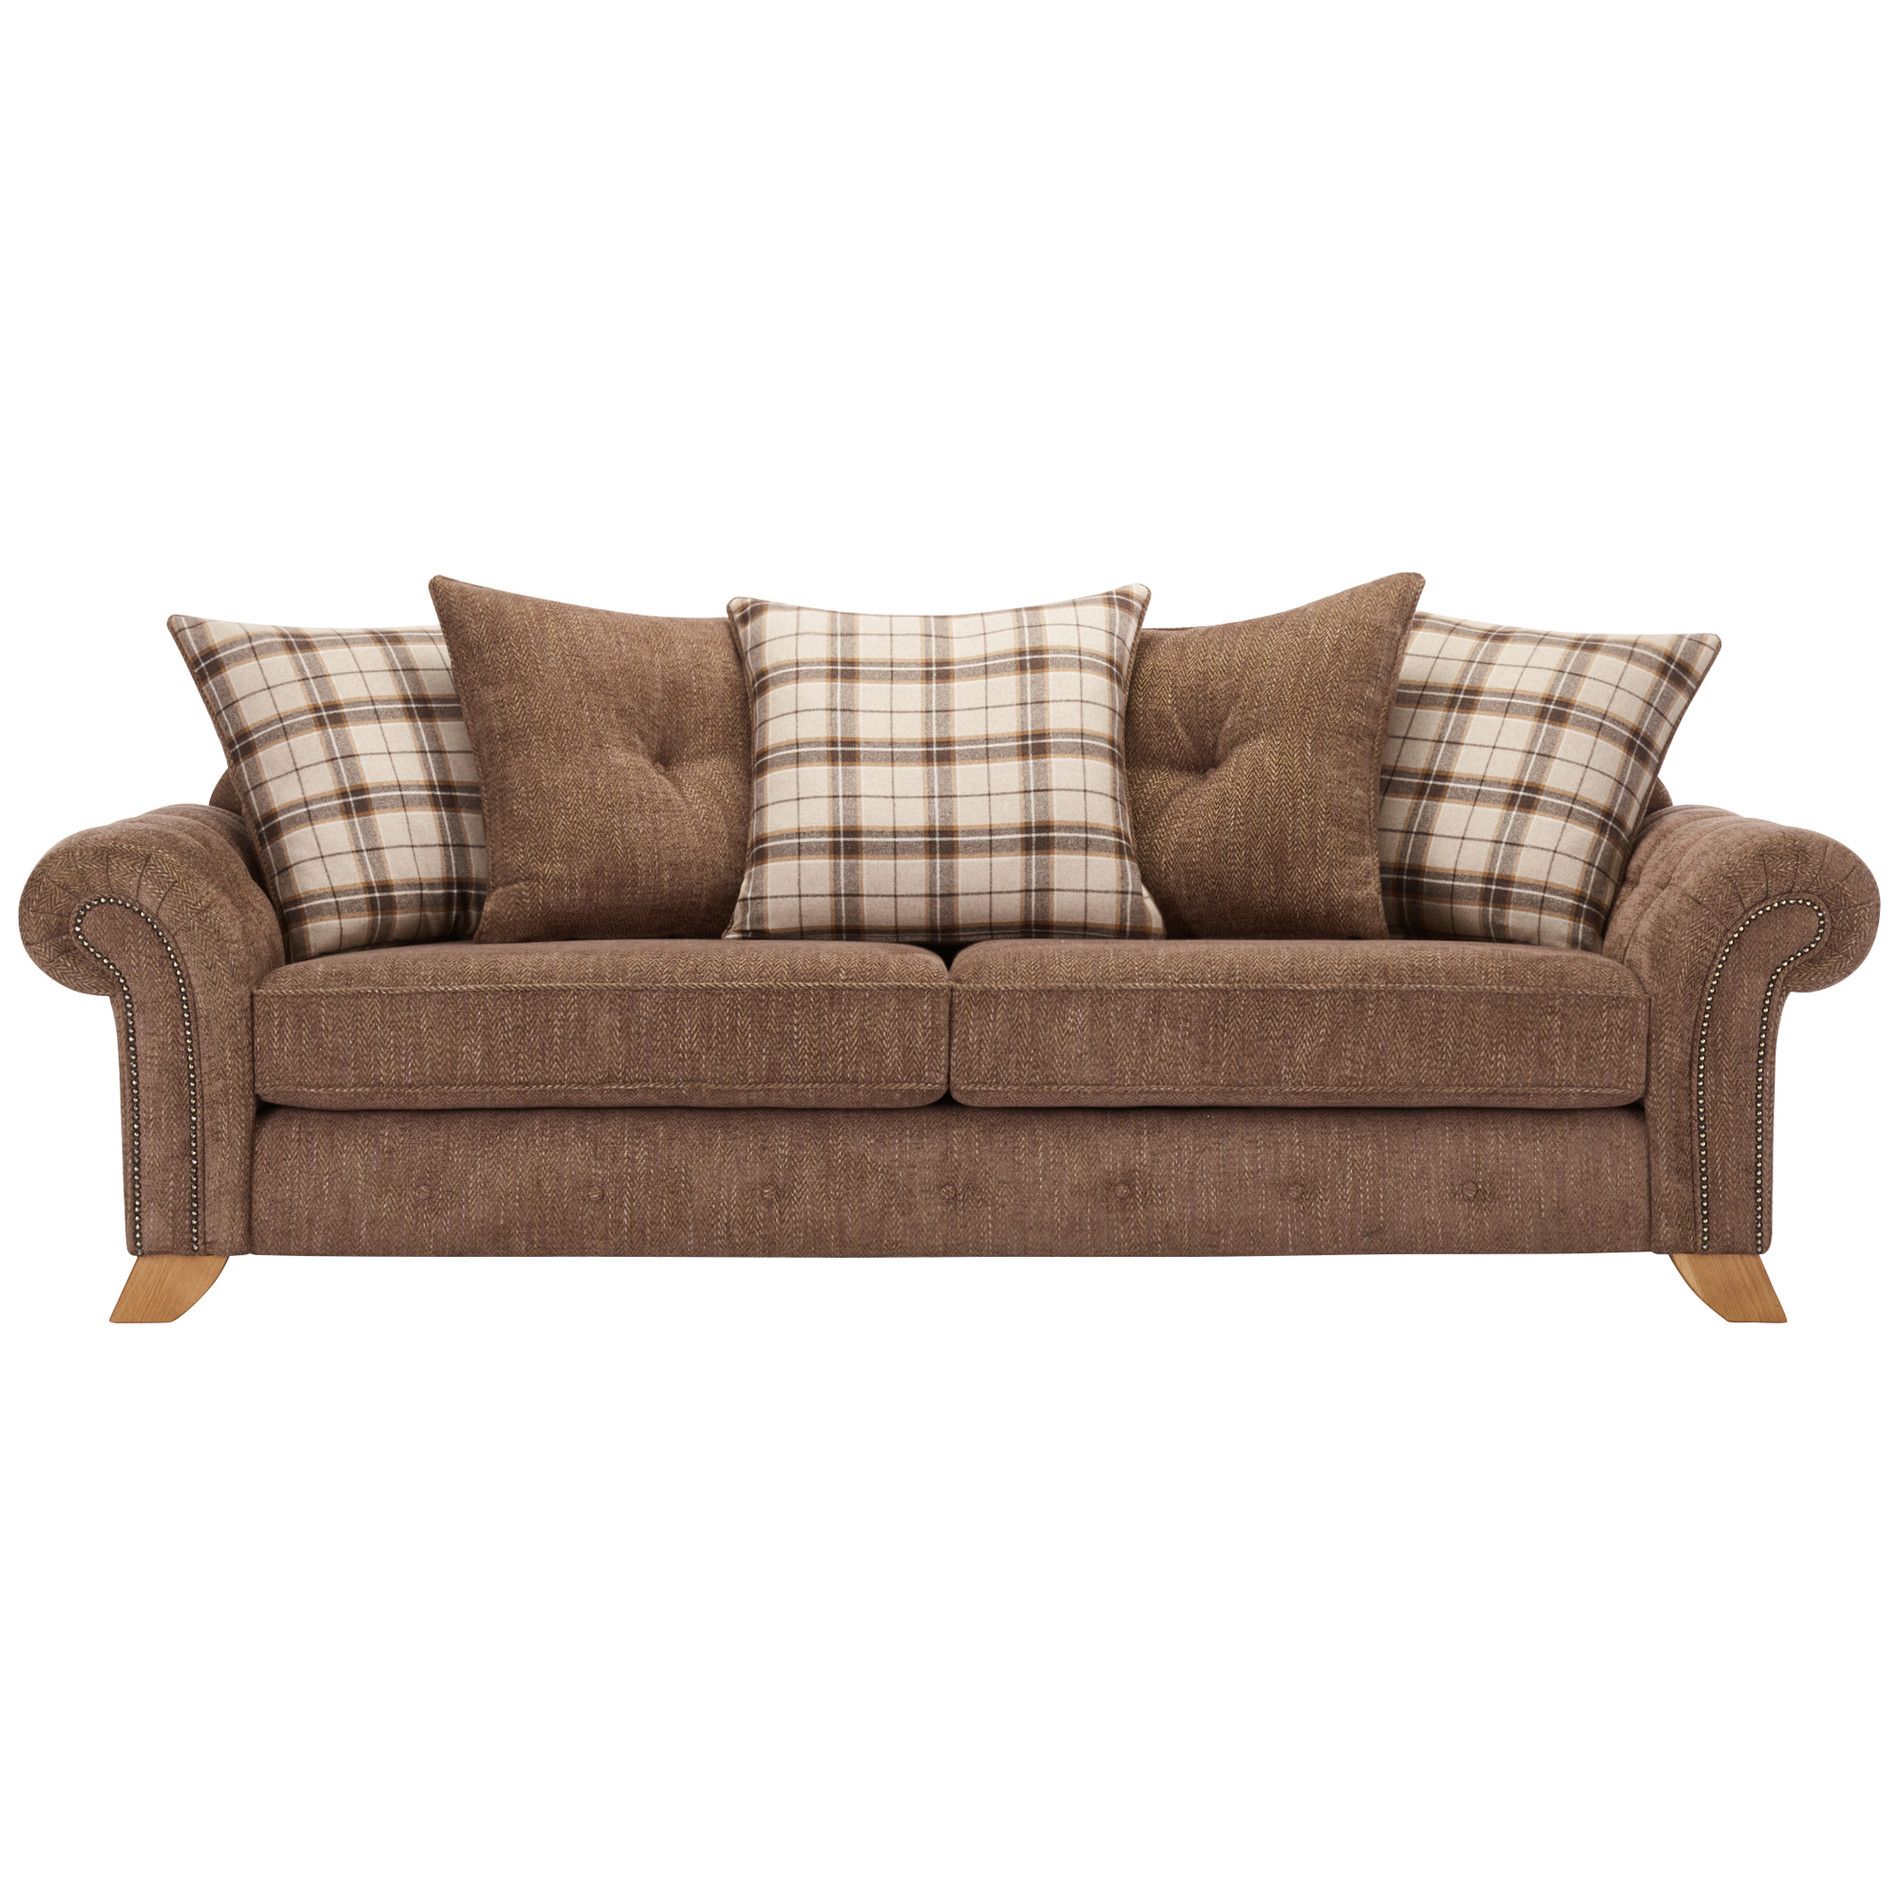 Montana 4 Seater Sofa With Pillow Back In Brown Fabric Regarding Lyvia Pillowback Sofa Sectional Sofas (View 13 of 15)